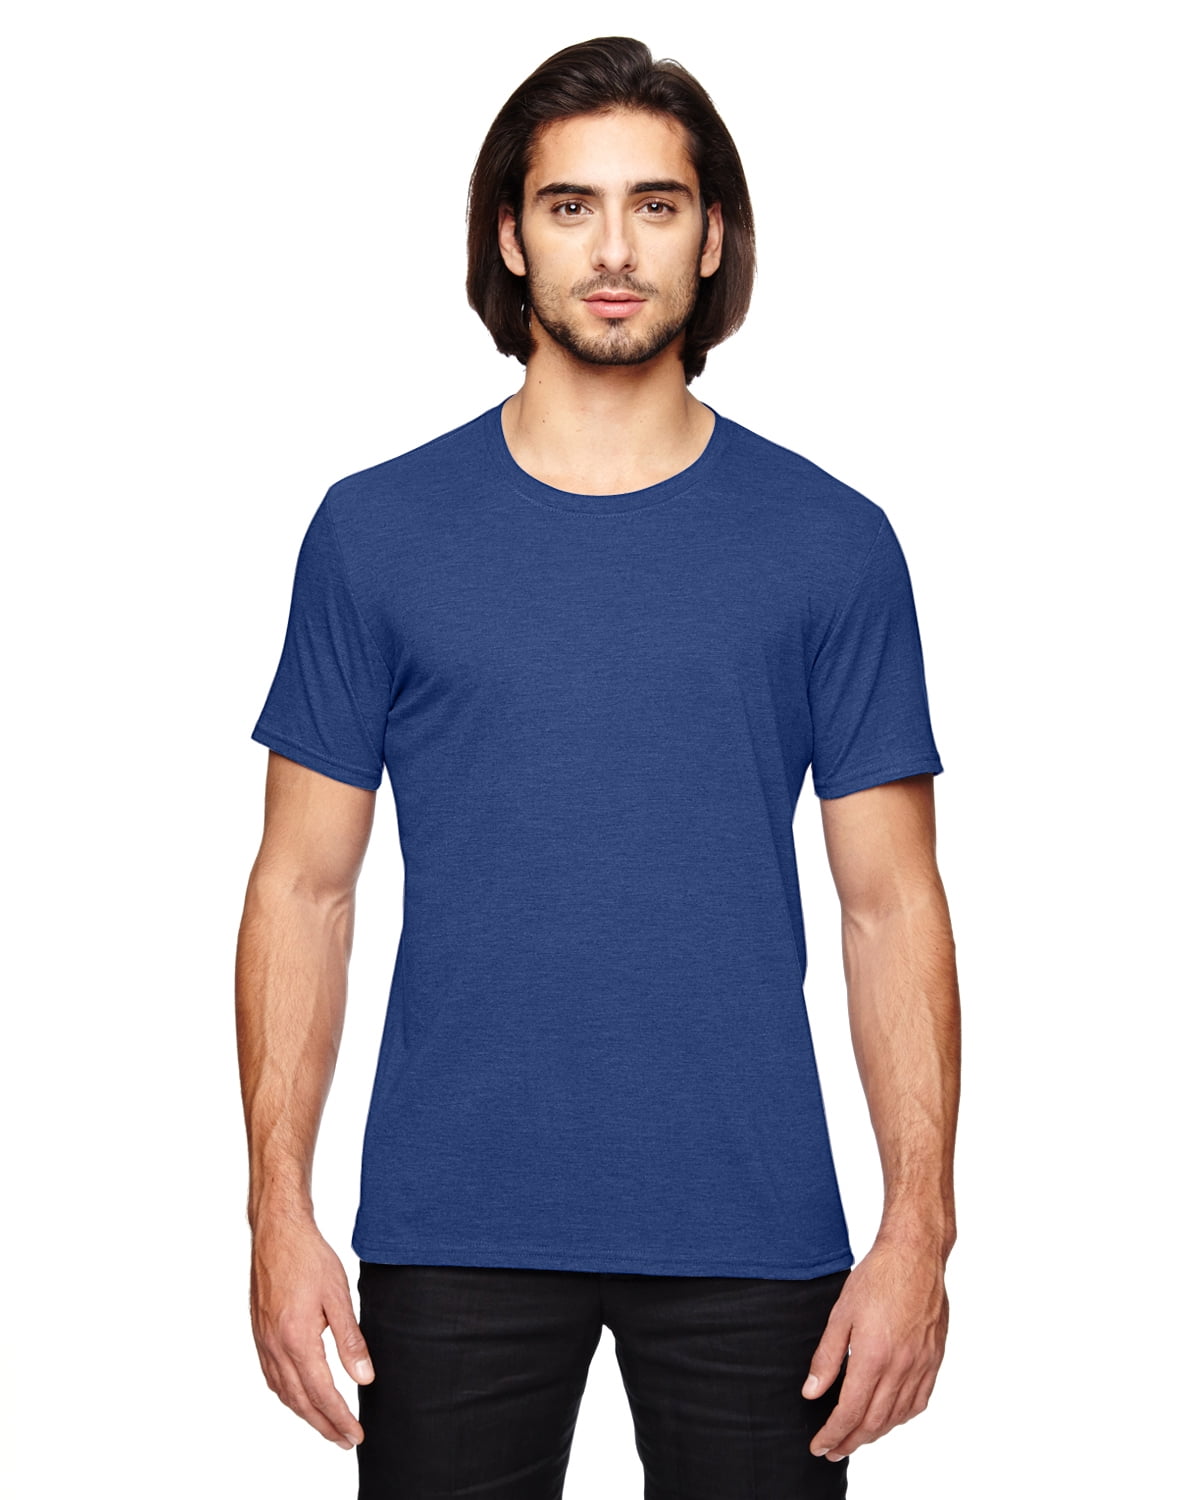 Tee Men Poly-Cotton-rayon Needle - JustBlanks 3X-Large Regular Double Neck Jersey Crew T Sleeves Shirt Tri-Blend - Tee BLUE Men\'s Sleeve HEATHER for Short